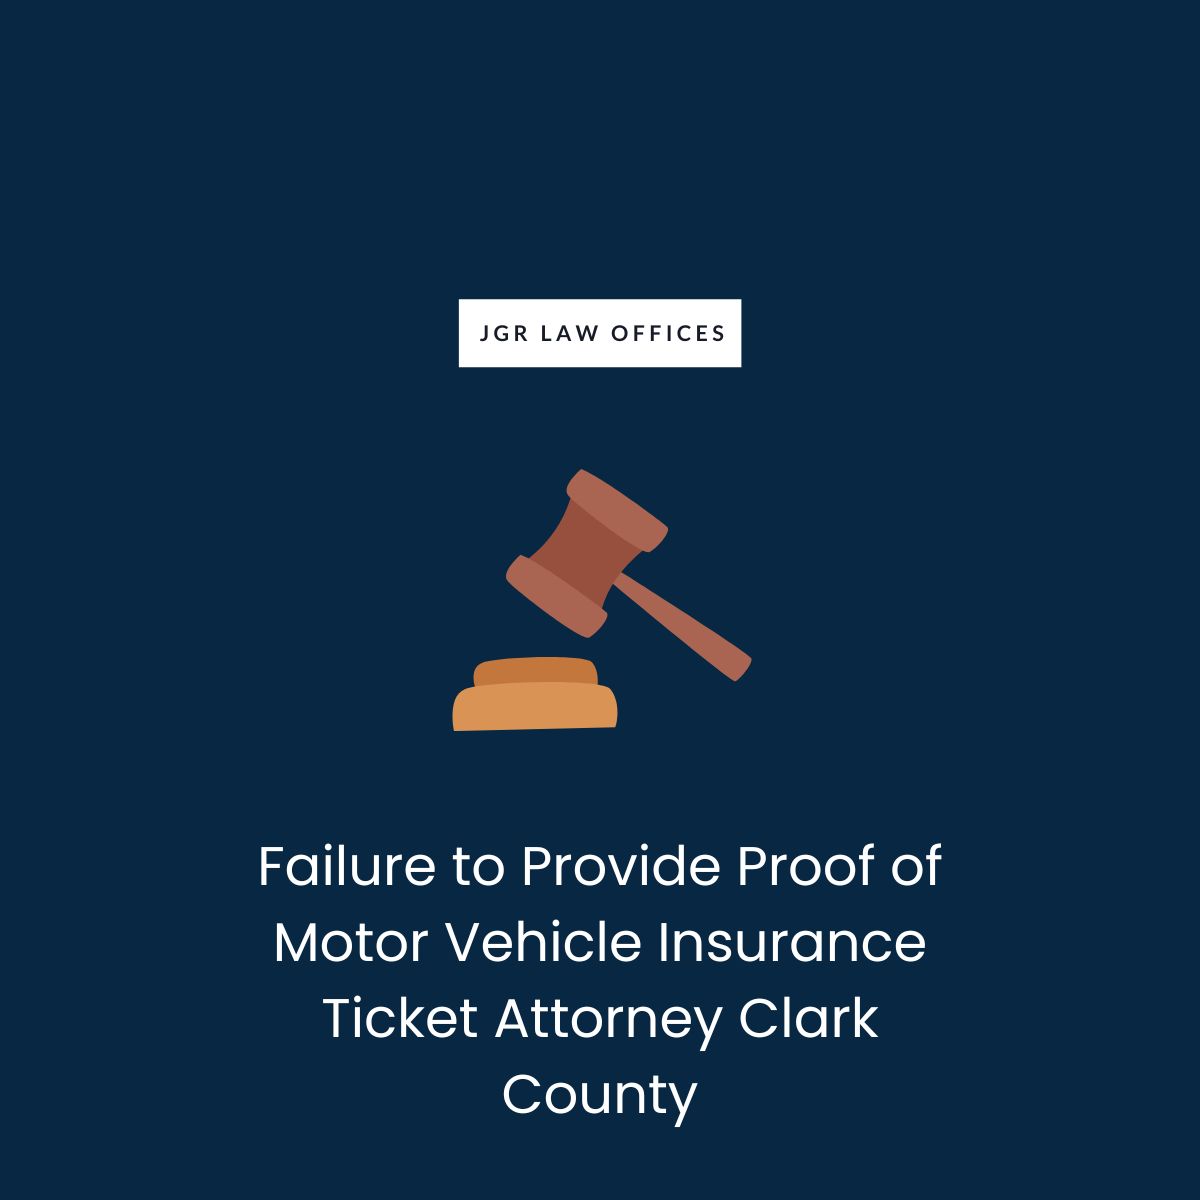 Failure to Provide Proof of Motor Vehicle Insurance Ticket Attorney Clark County